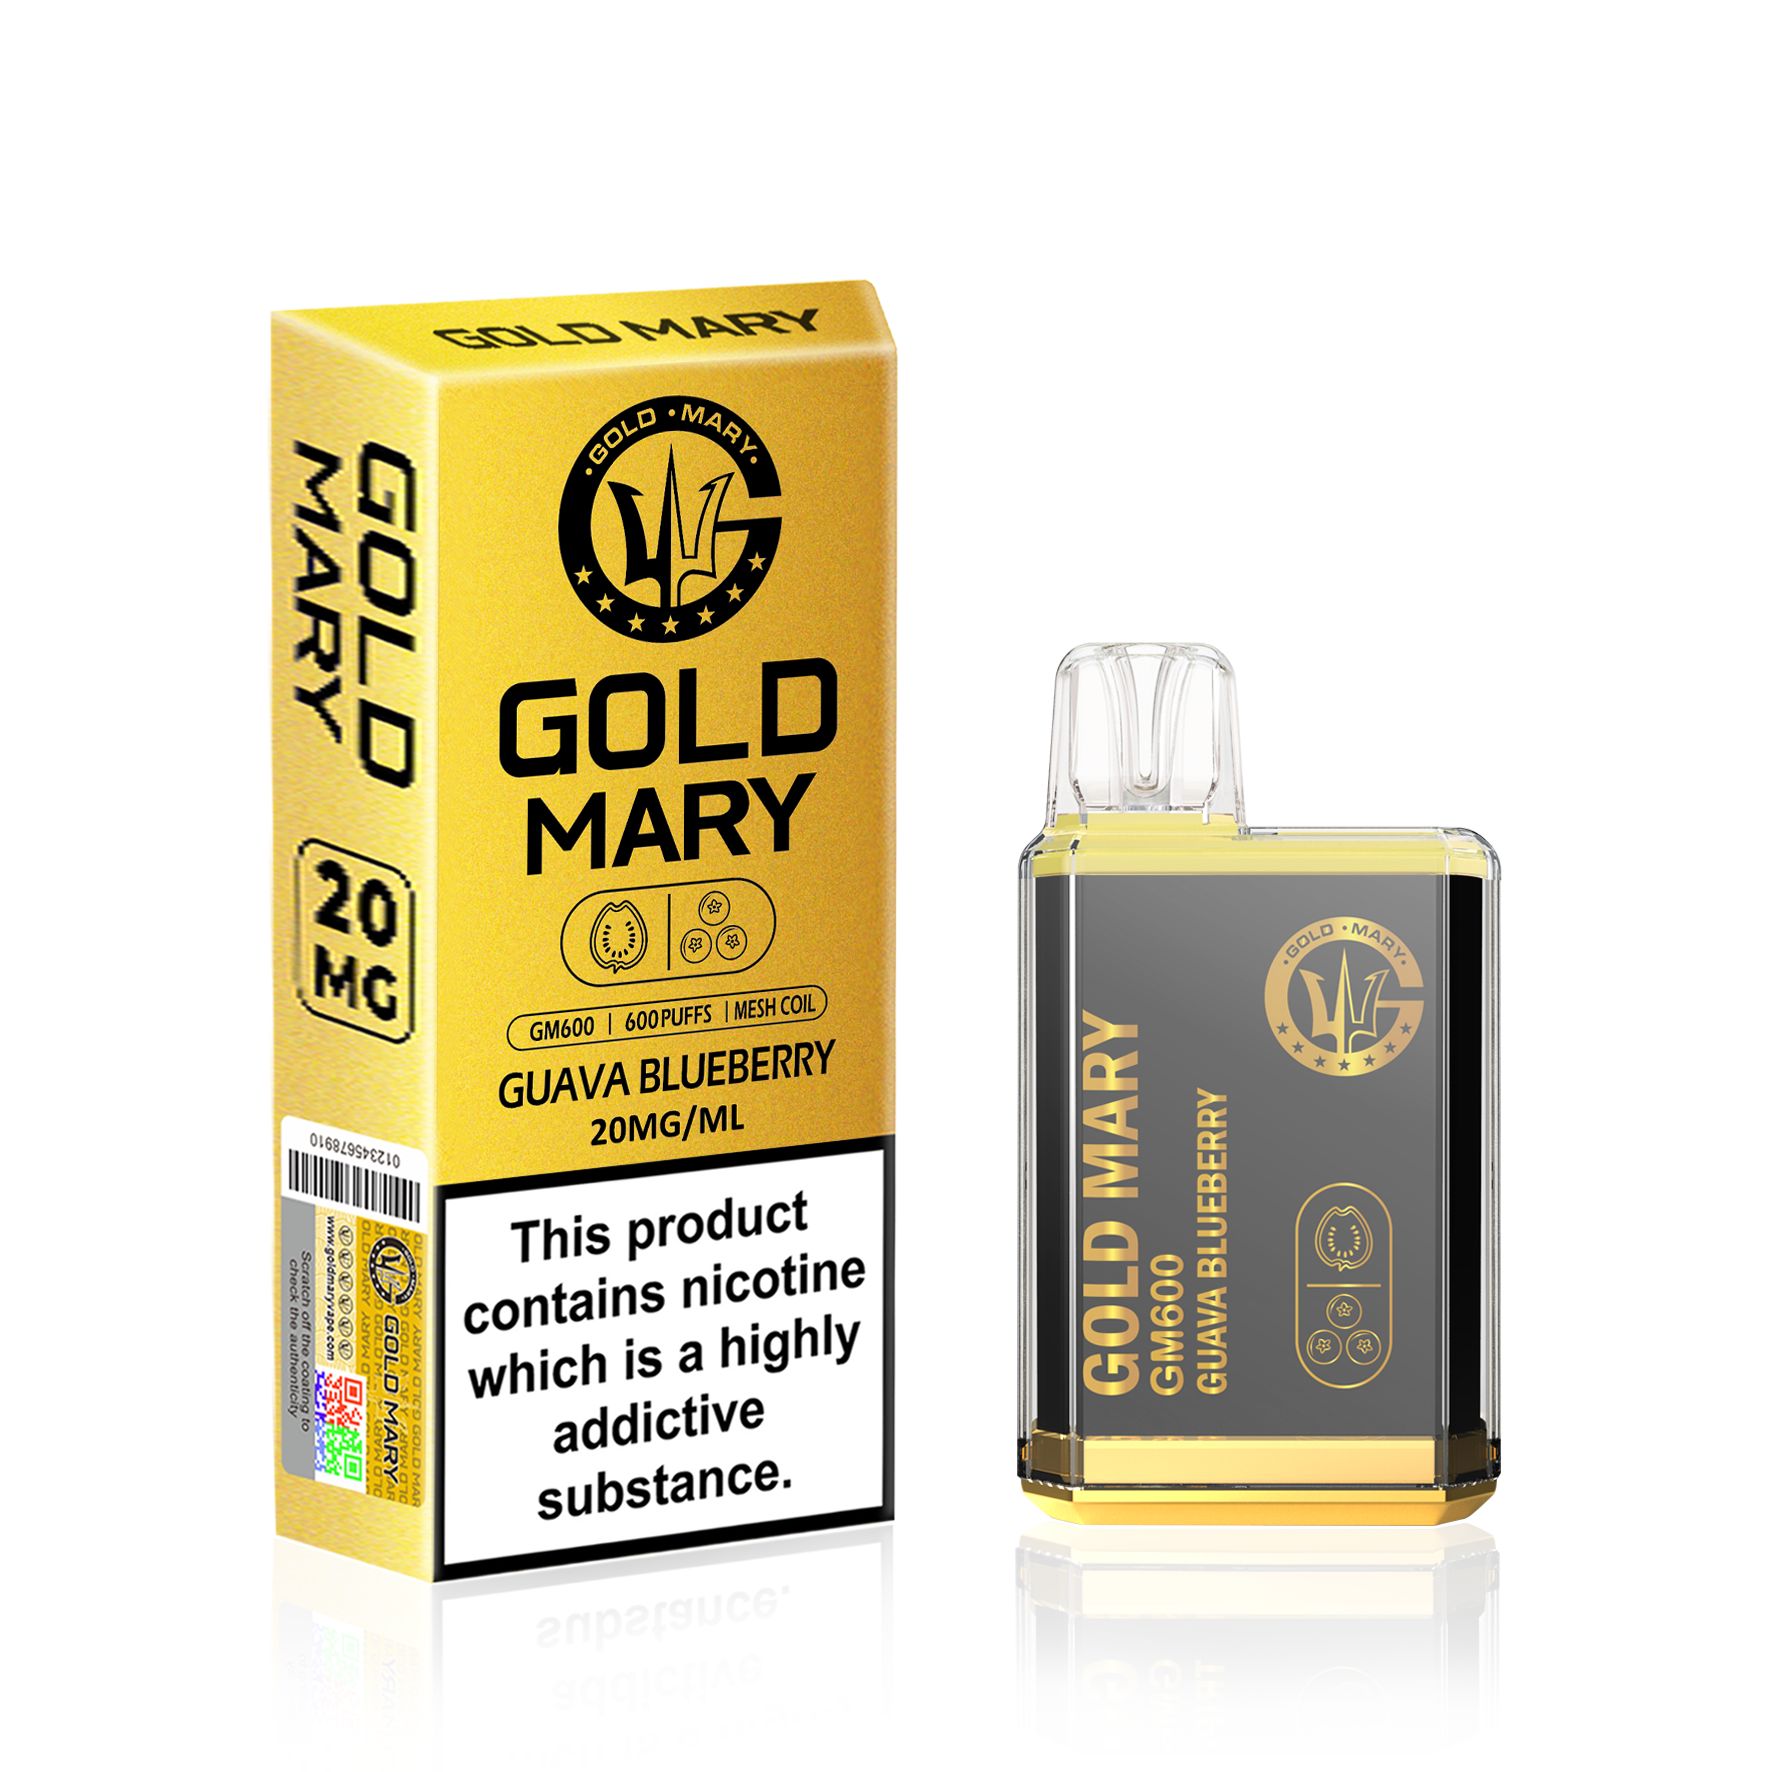 Gold Mary GM600 Disposable Vape Puff Bar Pod Device - Wolfvapes.co.uk-Guava Blueberry